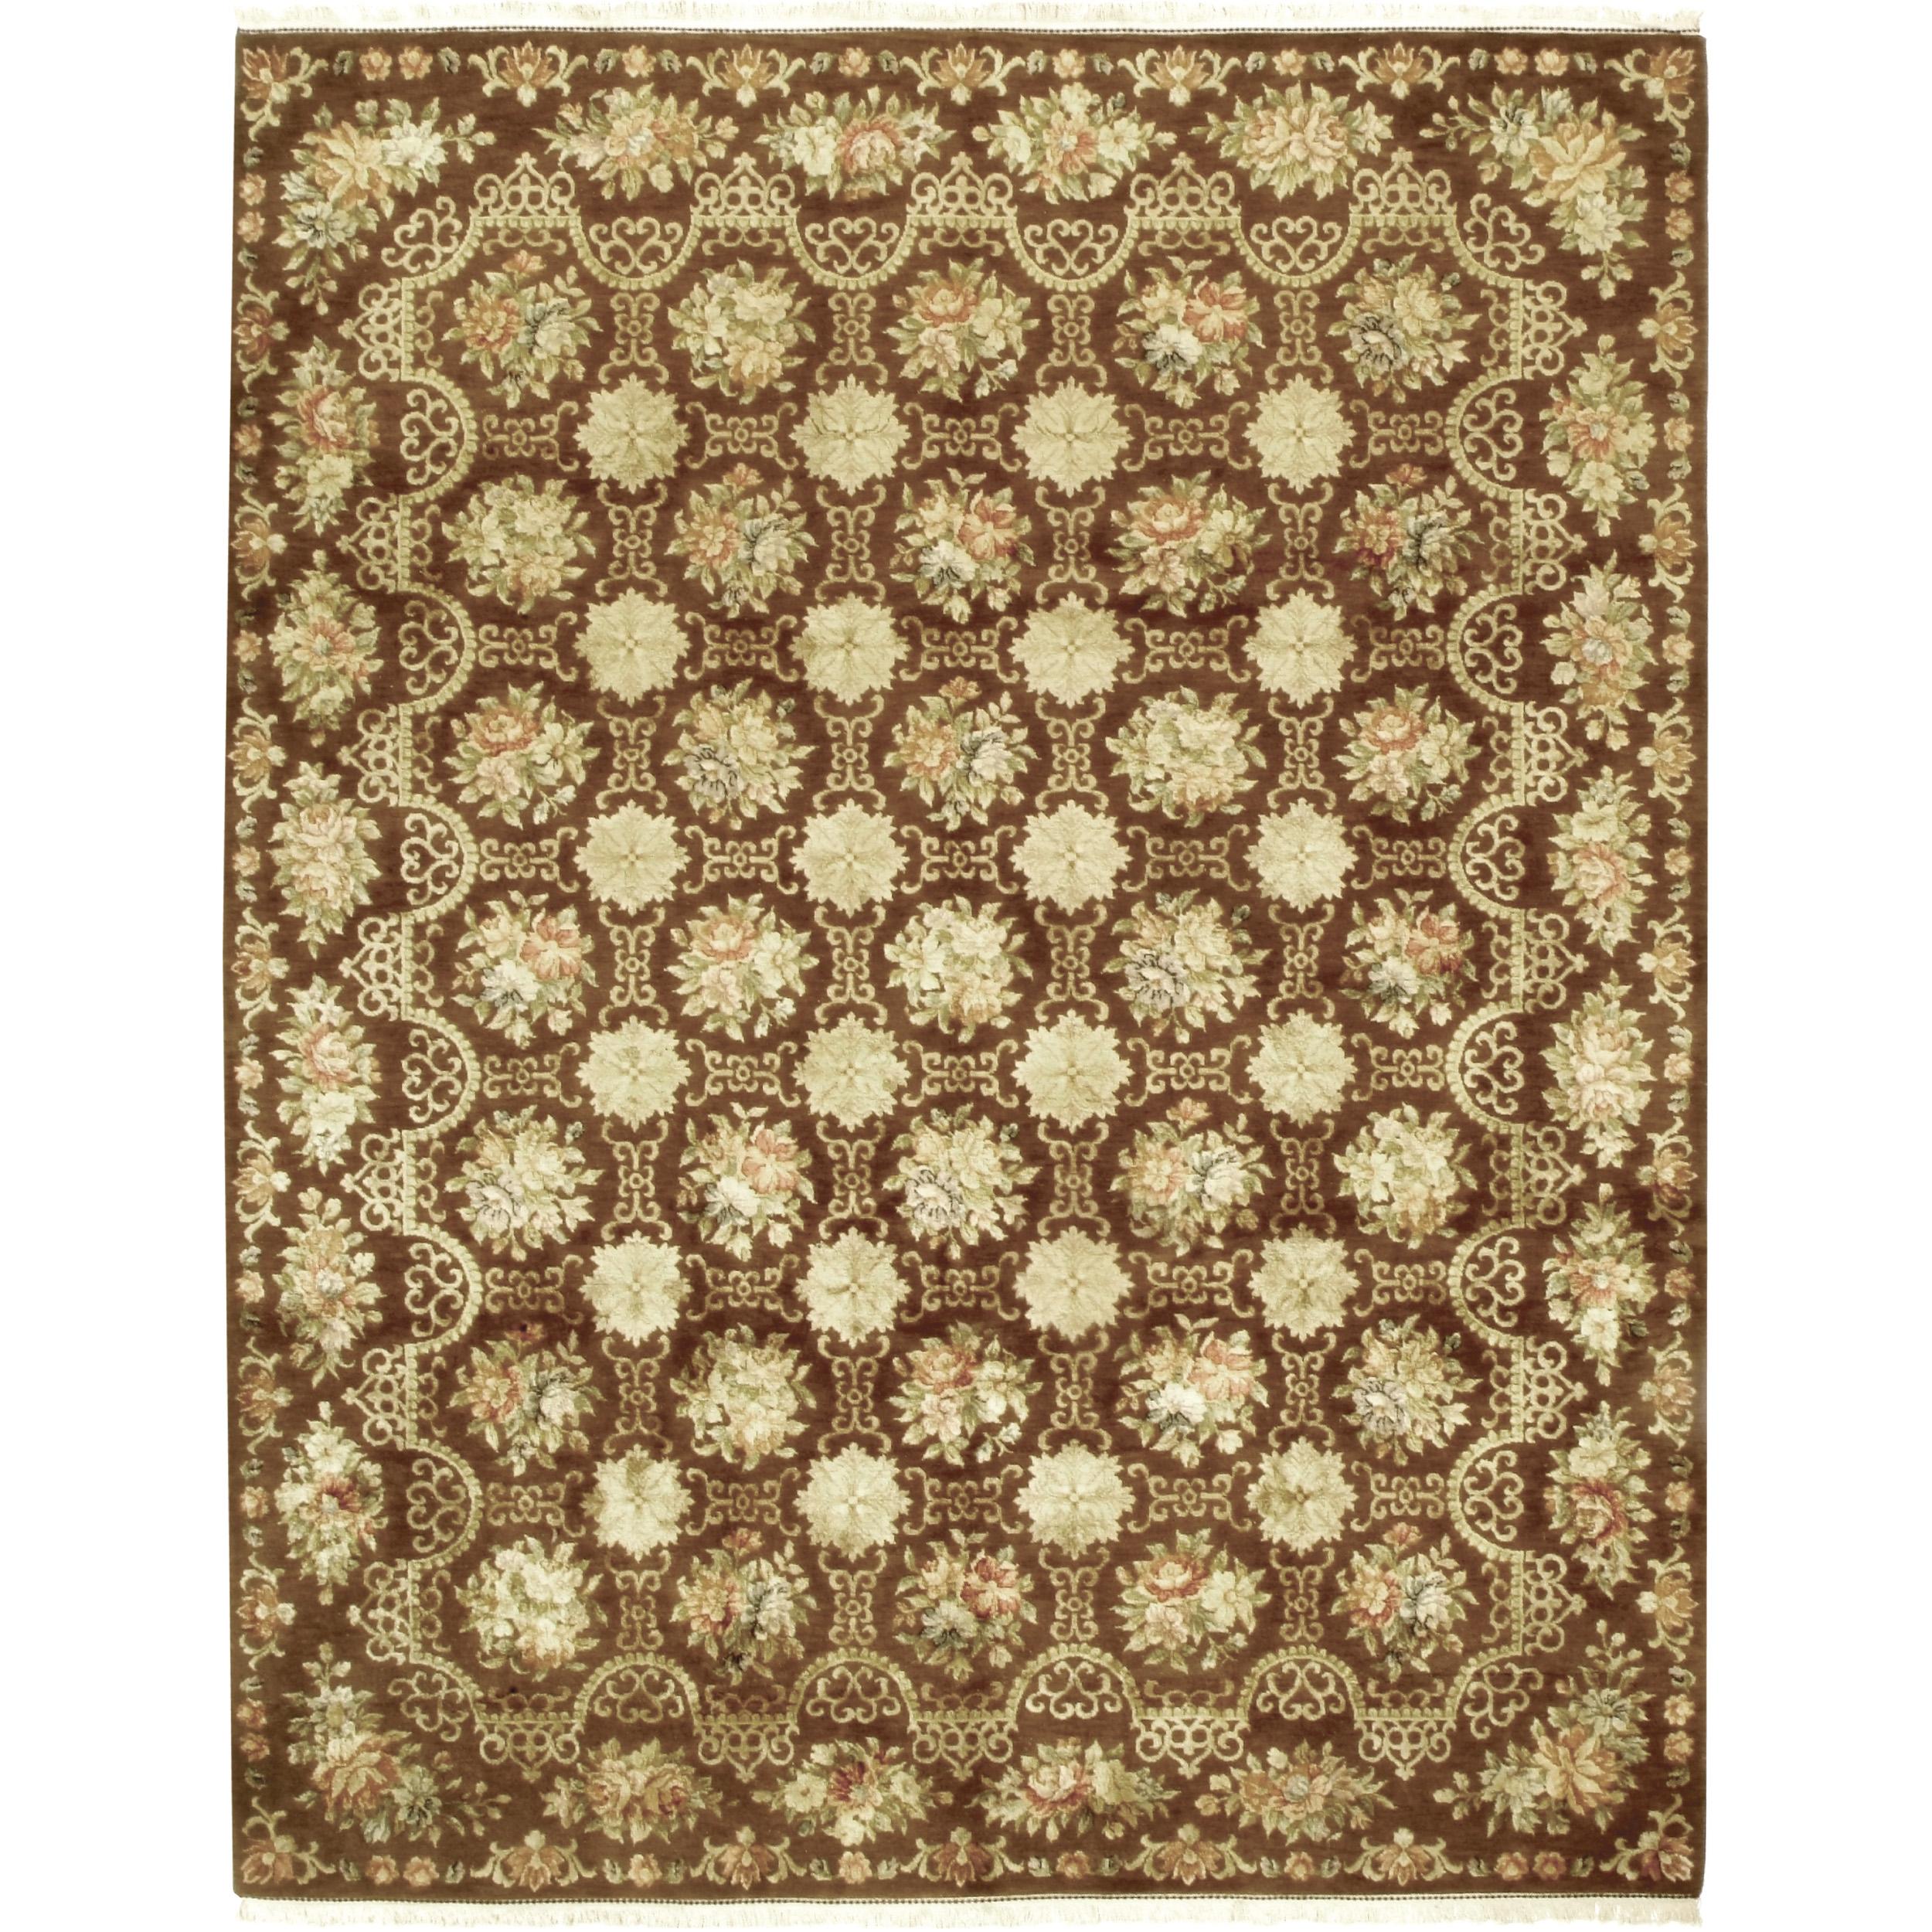 Luxury European Hand-Knotted Cambridge Brown 12x18 Rug In New Condition For Sale In Secaucus, NJ